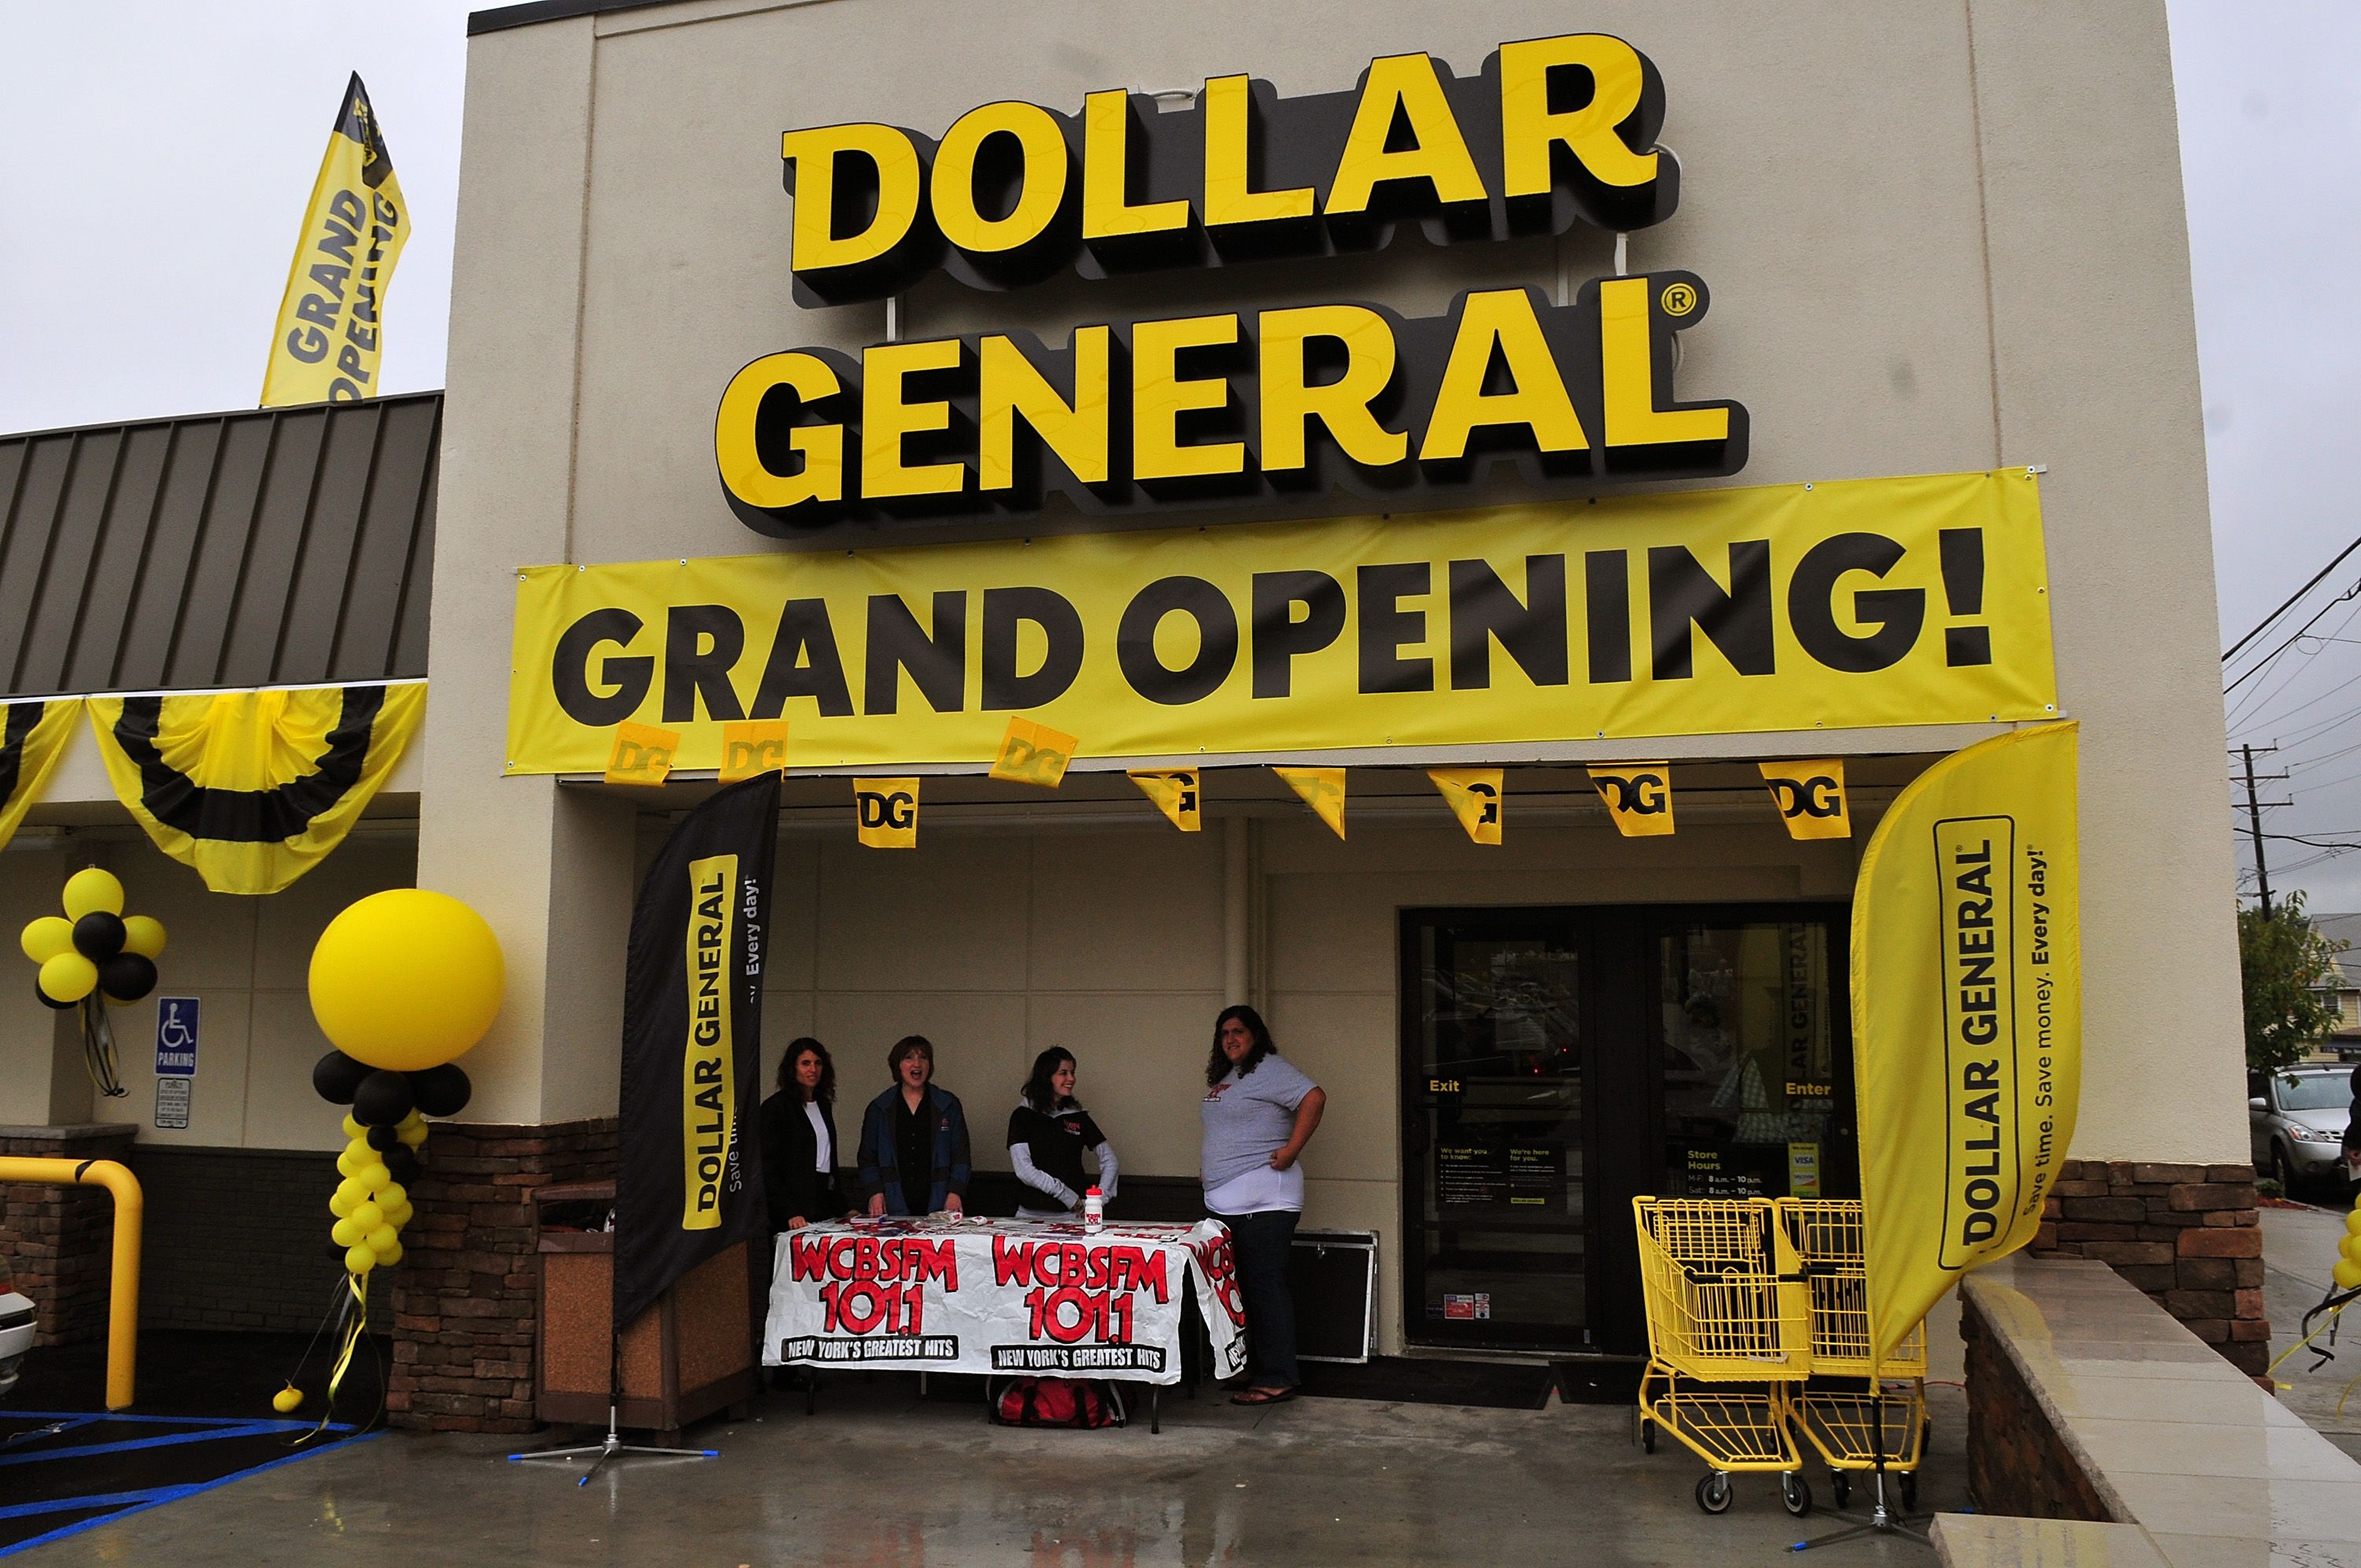 Nearly 1 in 3 new stores opening in the US is a Dollar General